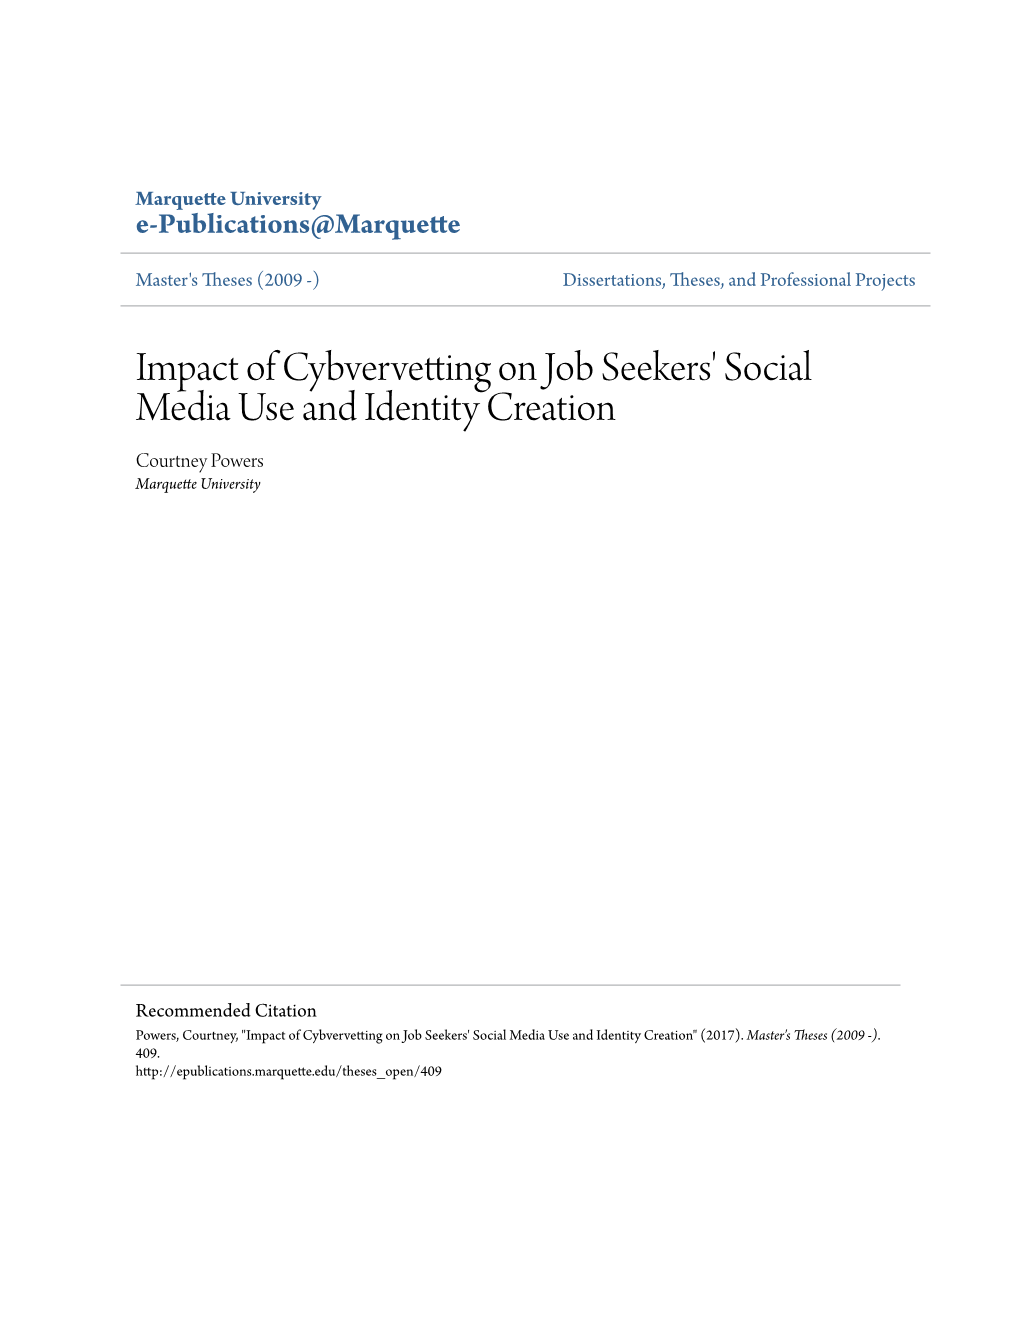 Impact of Cybvervetting on Job Seekers' Social Media Use and Identity Creation Courtney Powers Marquette University